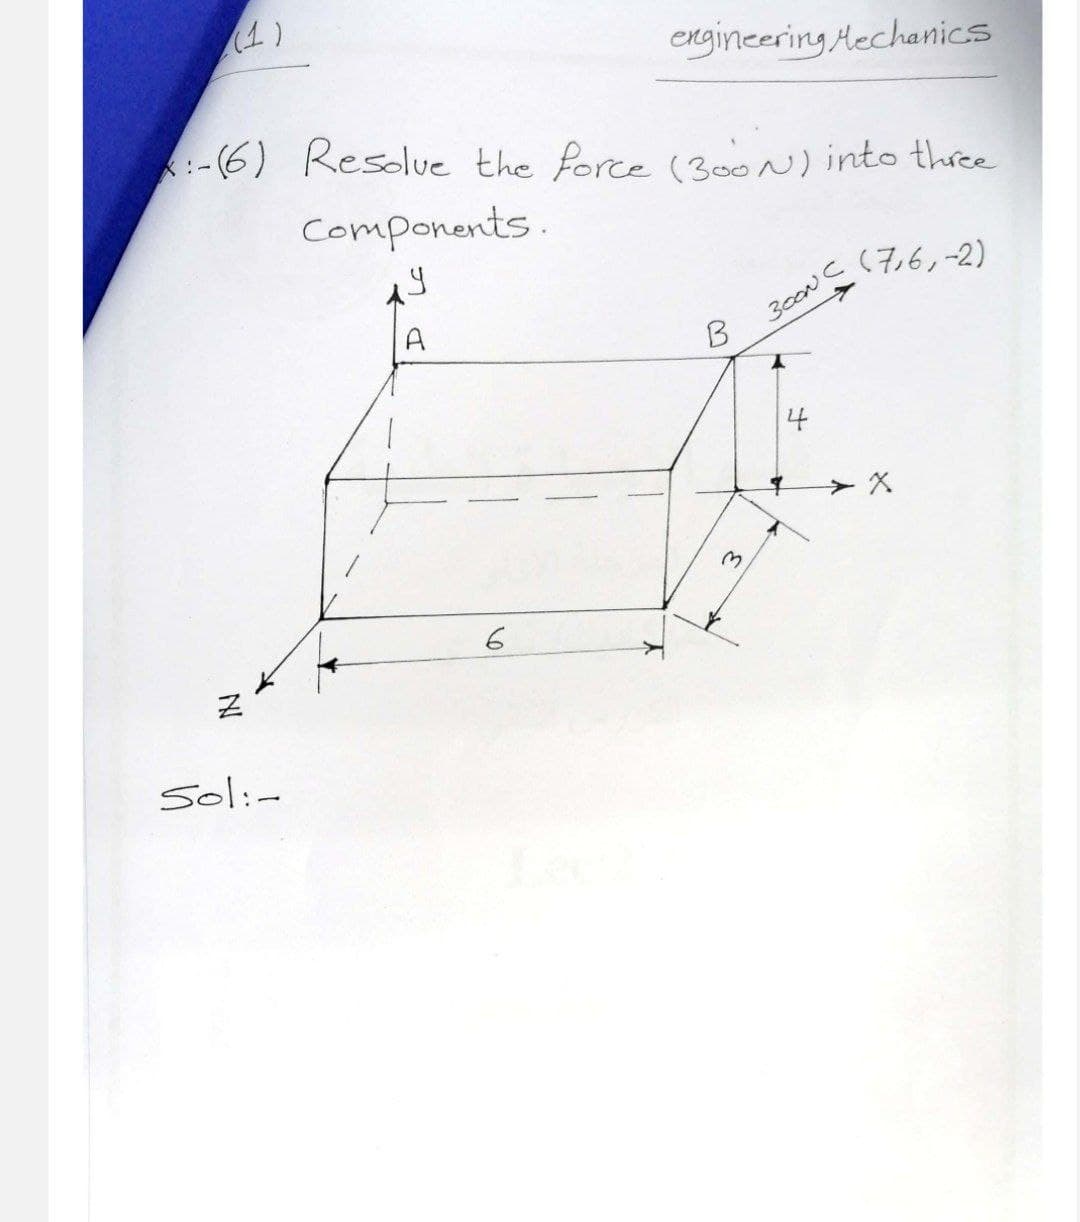 Z
IN
Sol:-
(1)
engineering Mechanics
-(6) Resolve the force (300N) into three
Components.
14
(7,6,-2)
A
6
B
3000 C
4